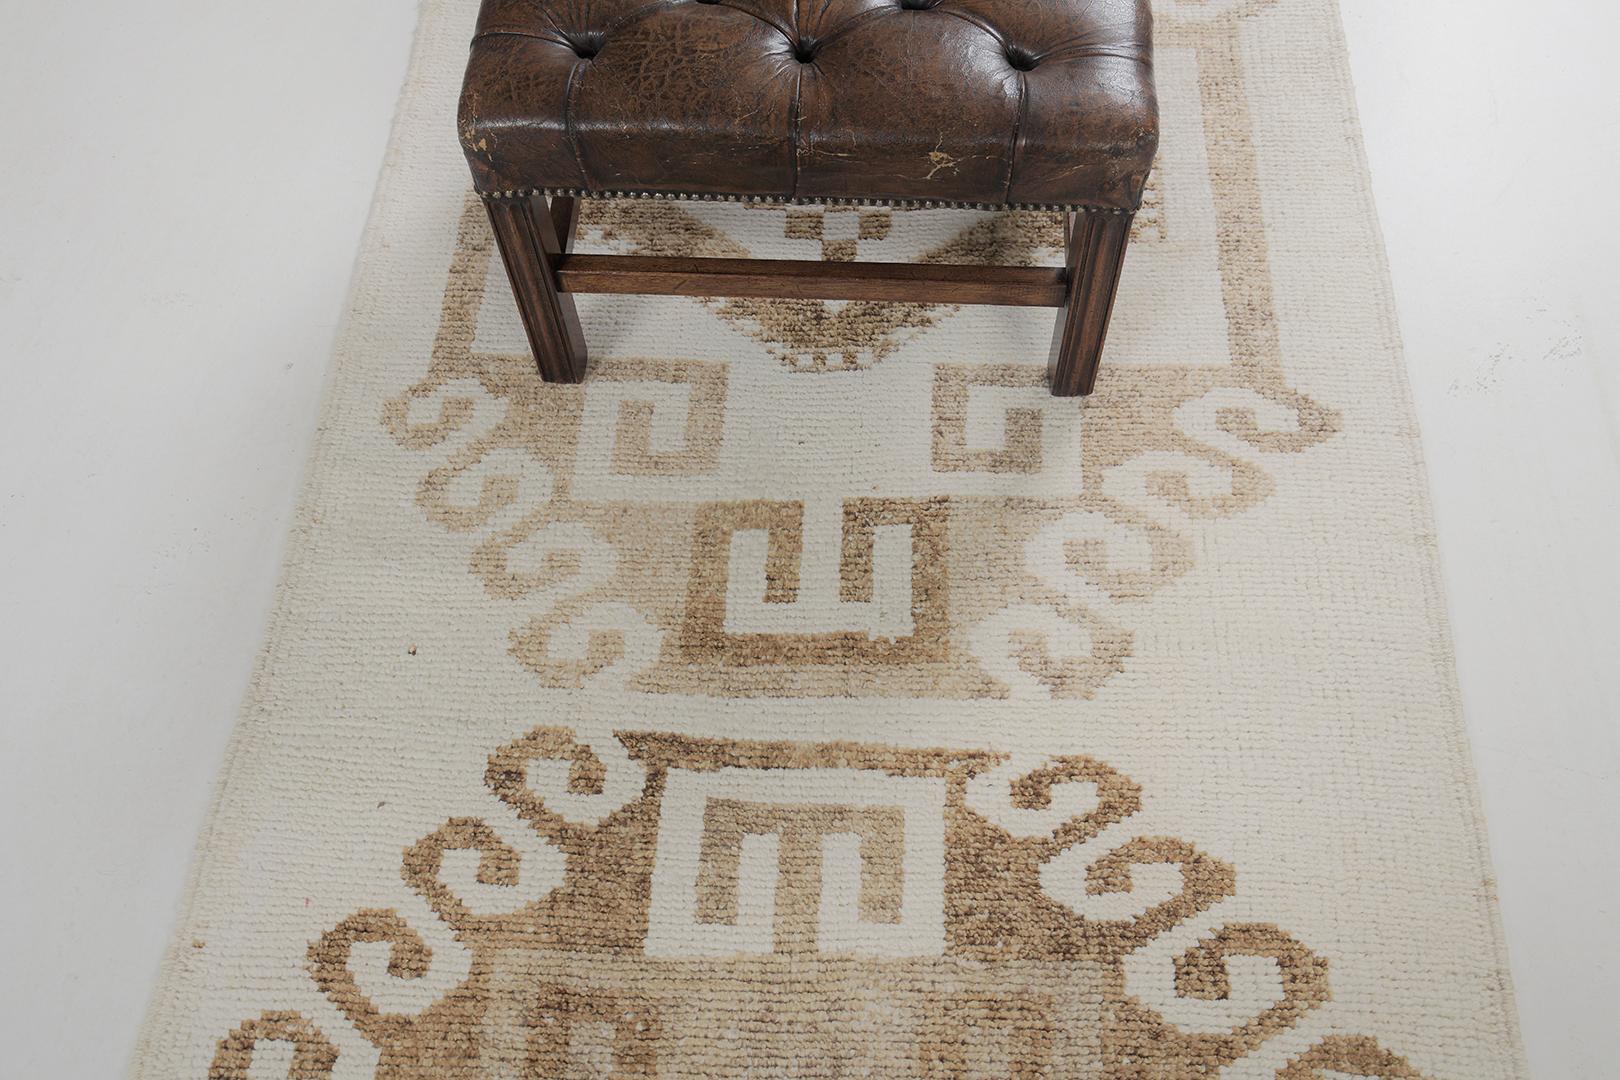 Emanating sophistication and finesse, this vintage Turkish Kurdish runner provides an elegant and impressive aesthetic design in warm subtle hues. Series of medallions anchored with delicate gul and diamonds floats in an abrashed cream field. The